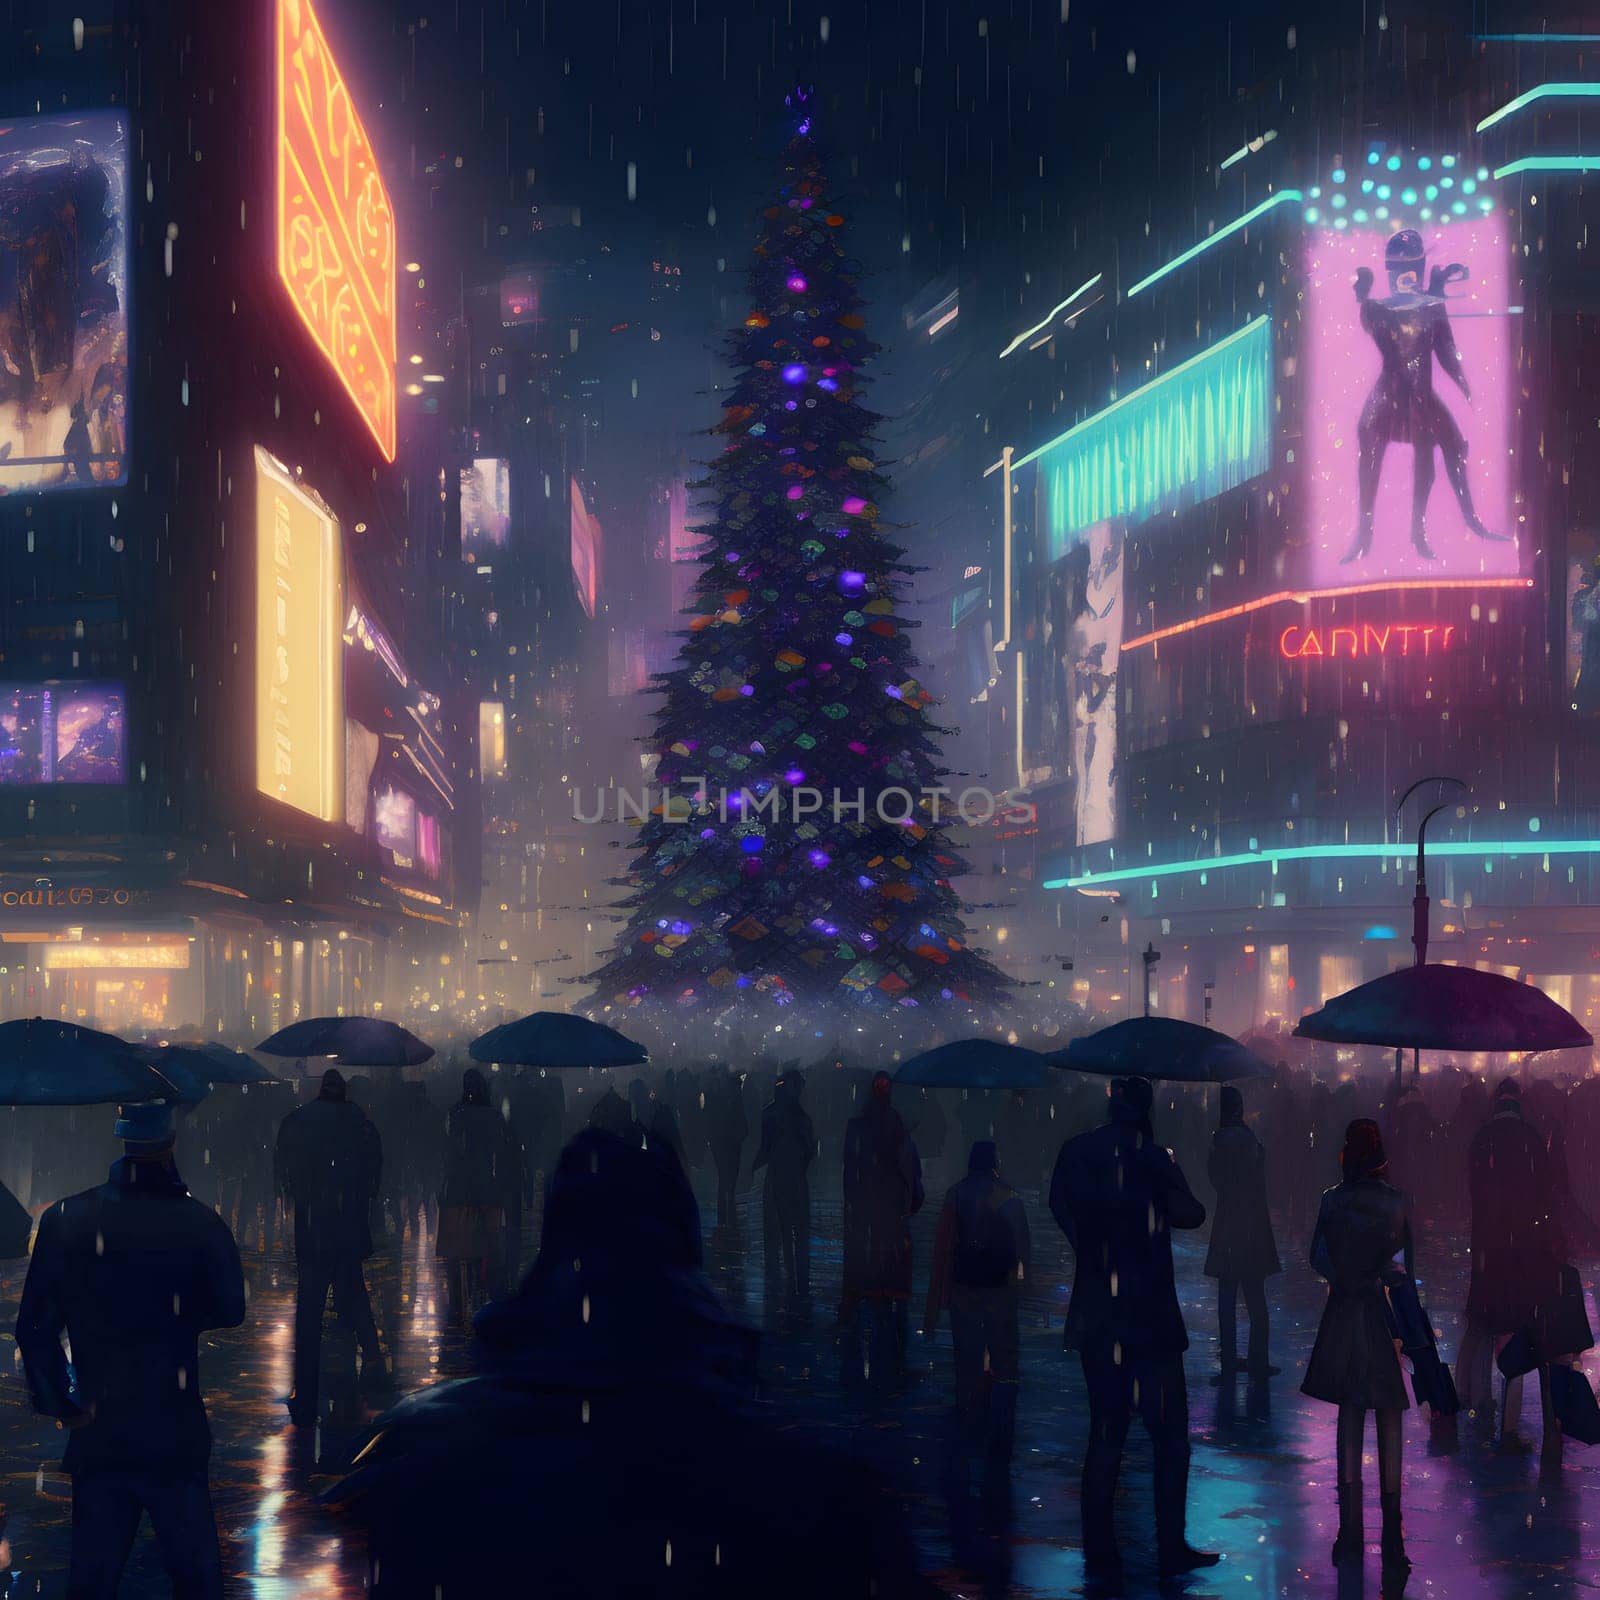 cyberpunk neon illuminated city street at christmas night with crowd of people and large xmas tree, picture produced by neural network from scratch using text query